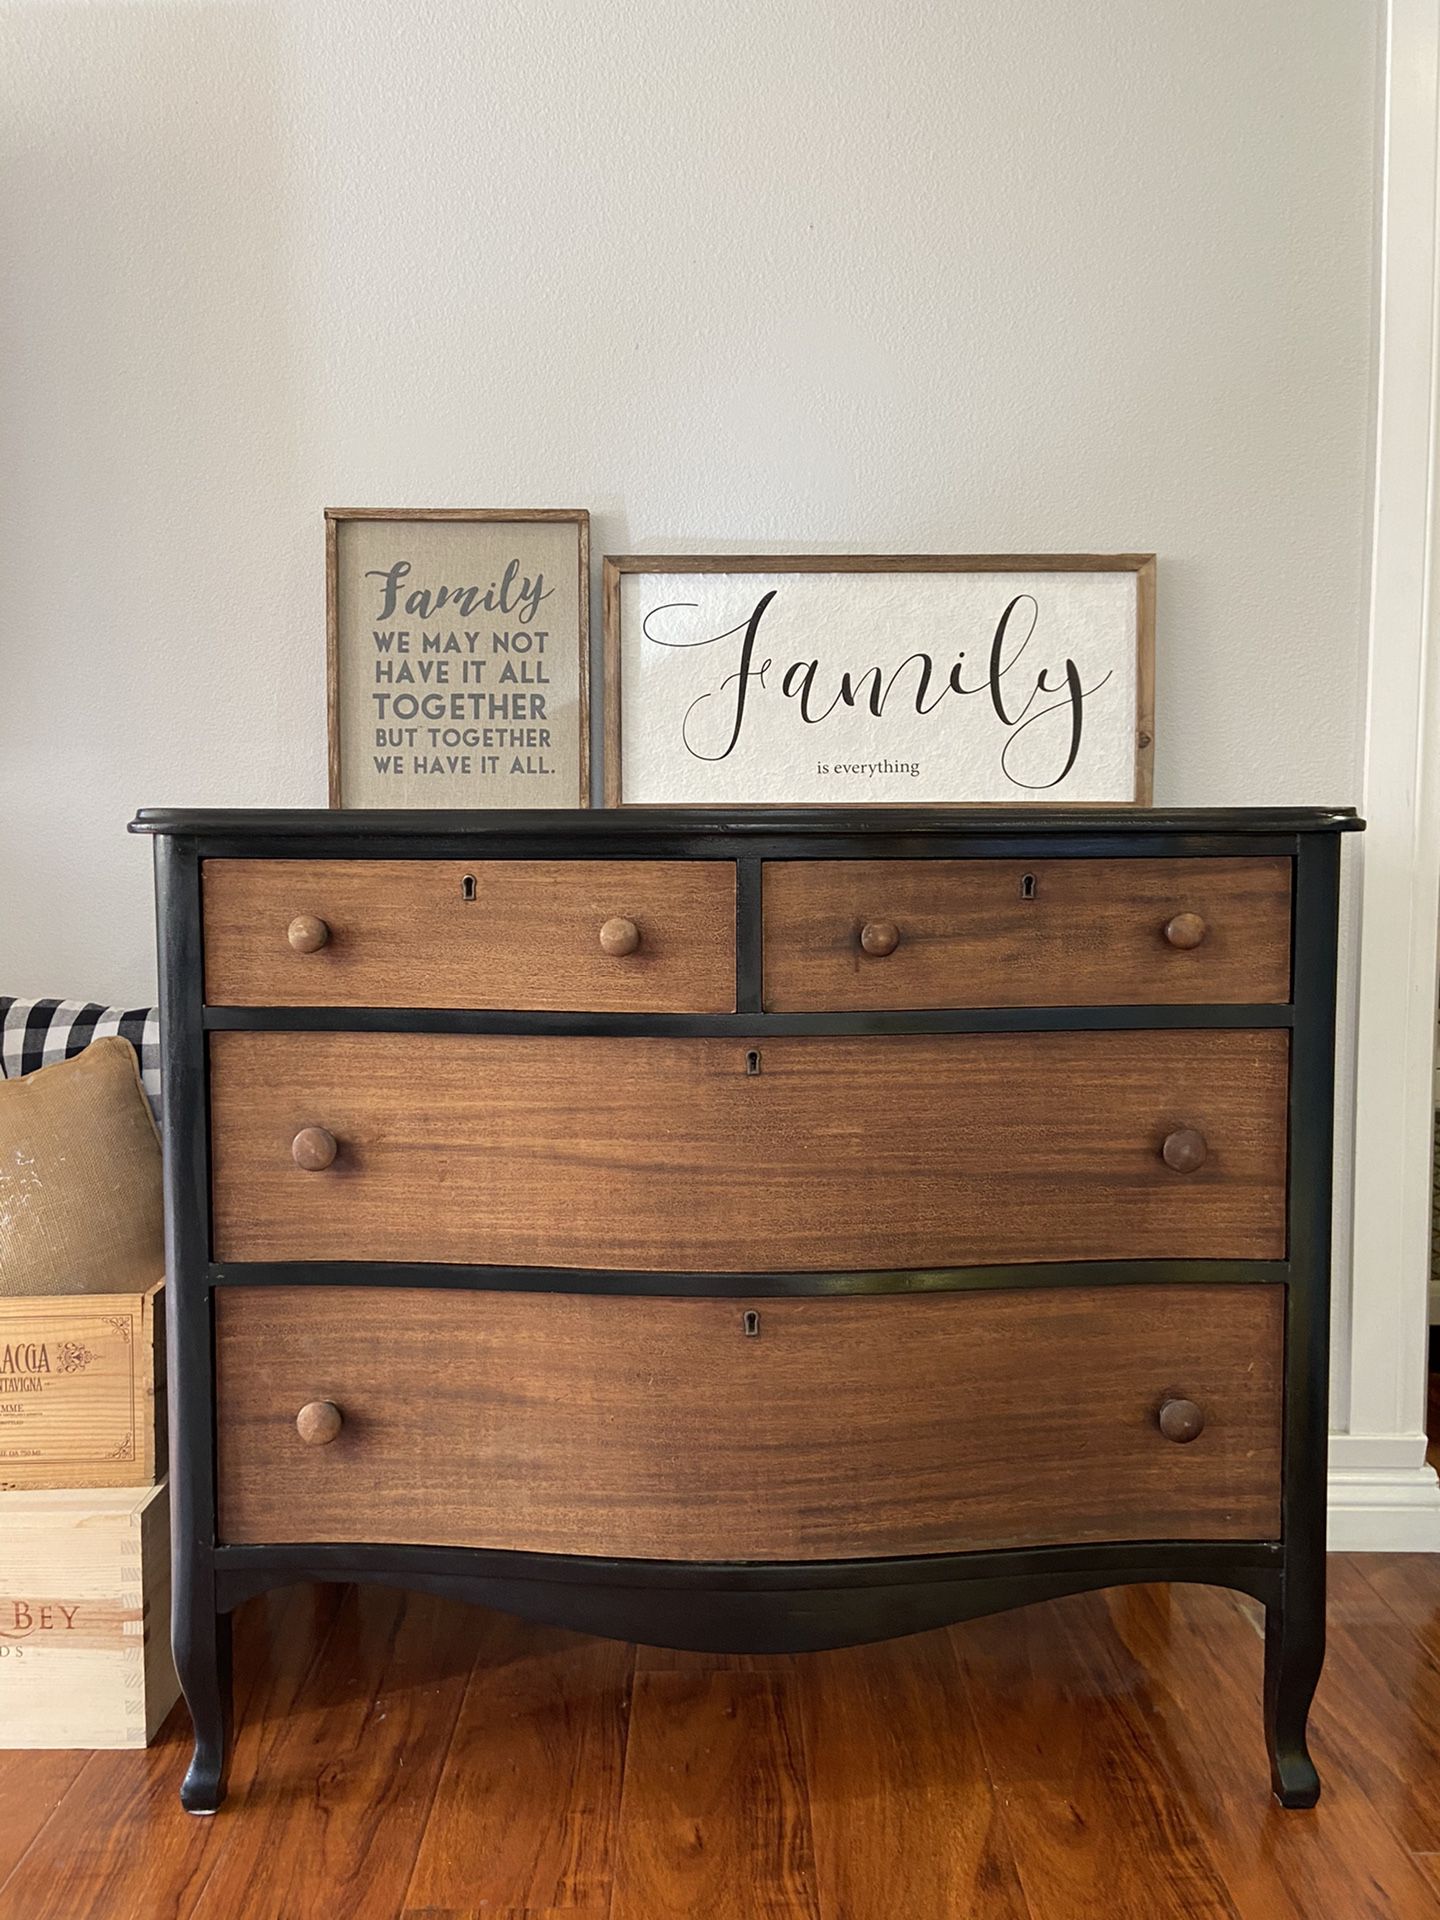 Farmhouse chest of drawers / dresser